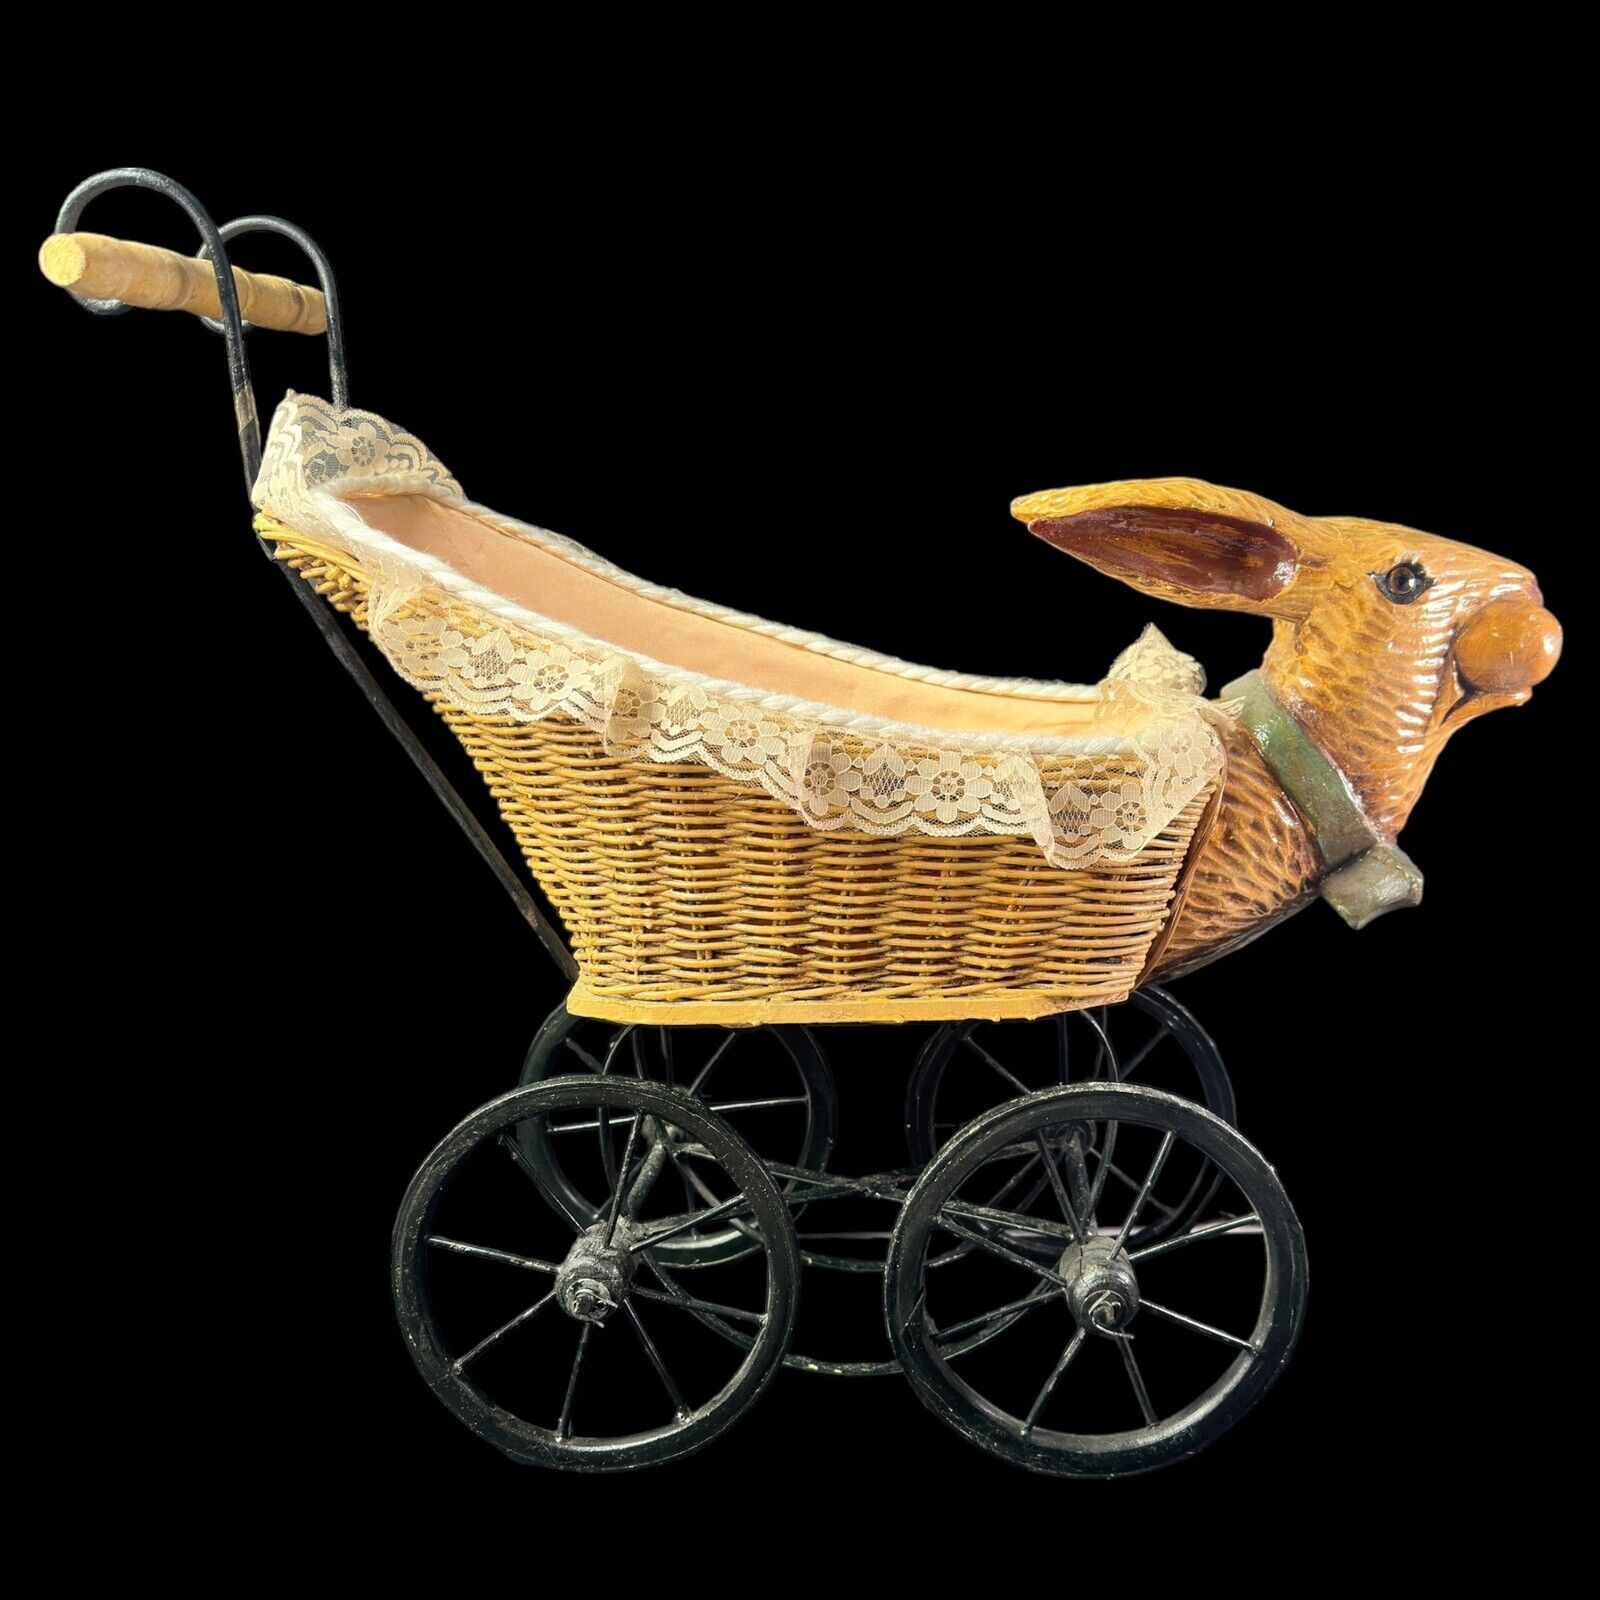 Vintage Pram Bunny Rabbit Baby Carriage - Carved Wood Head and Handle